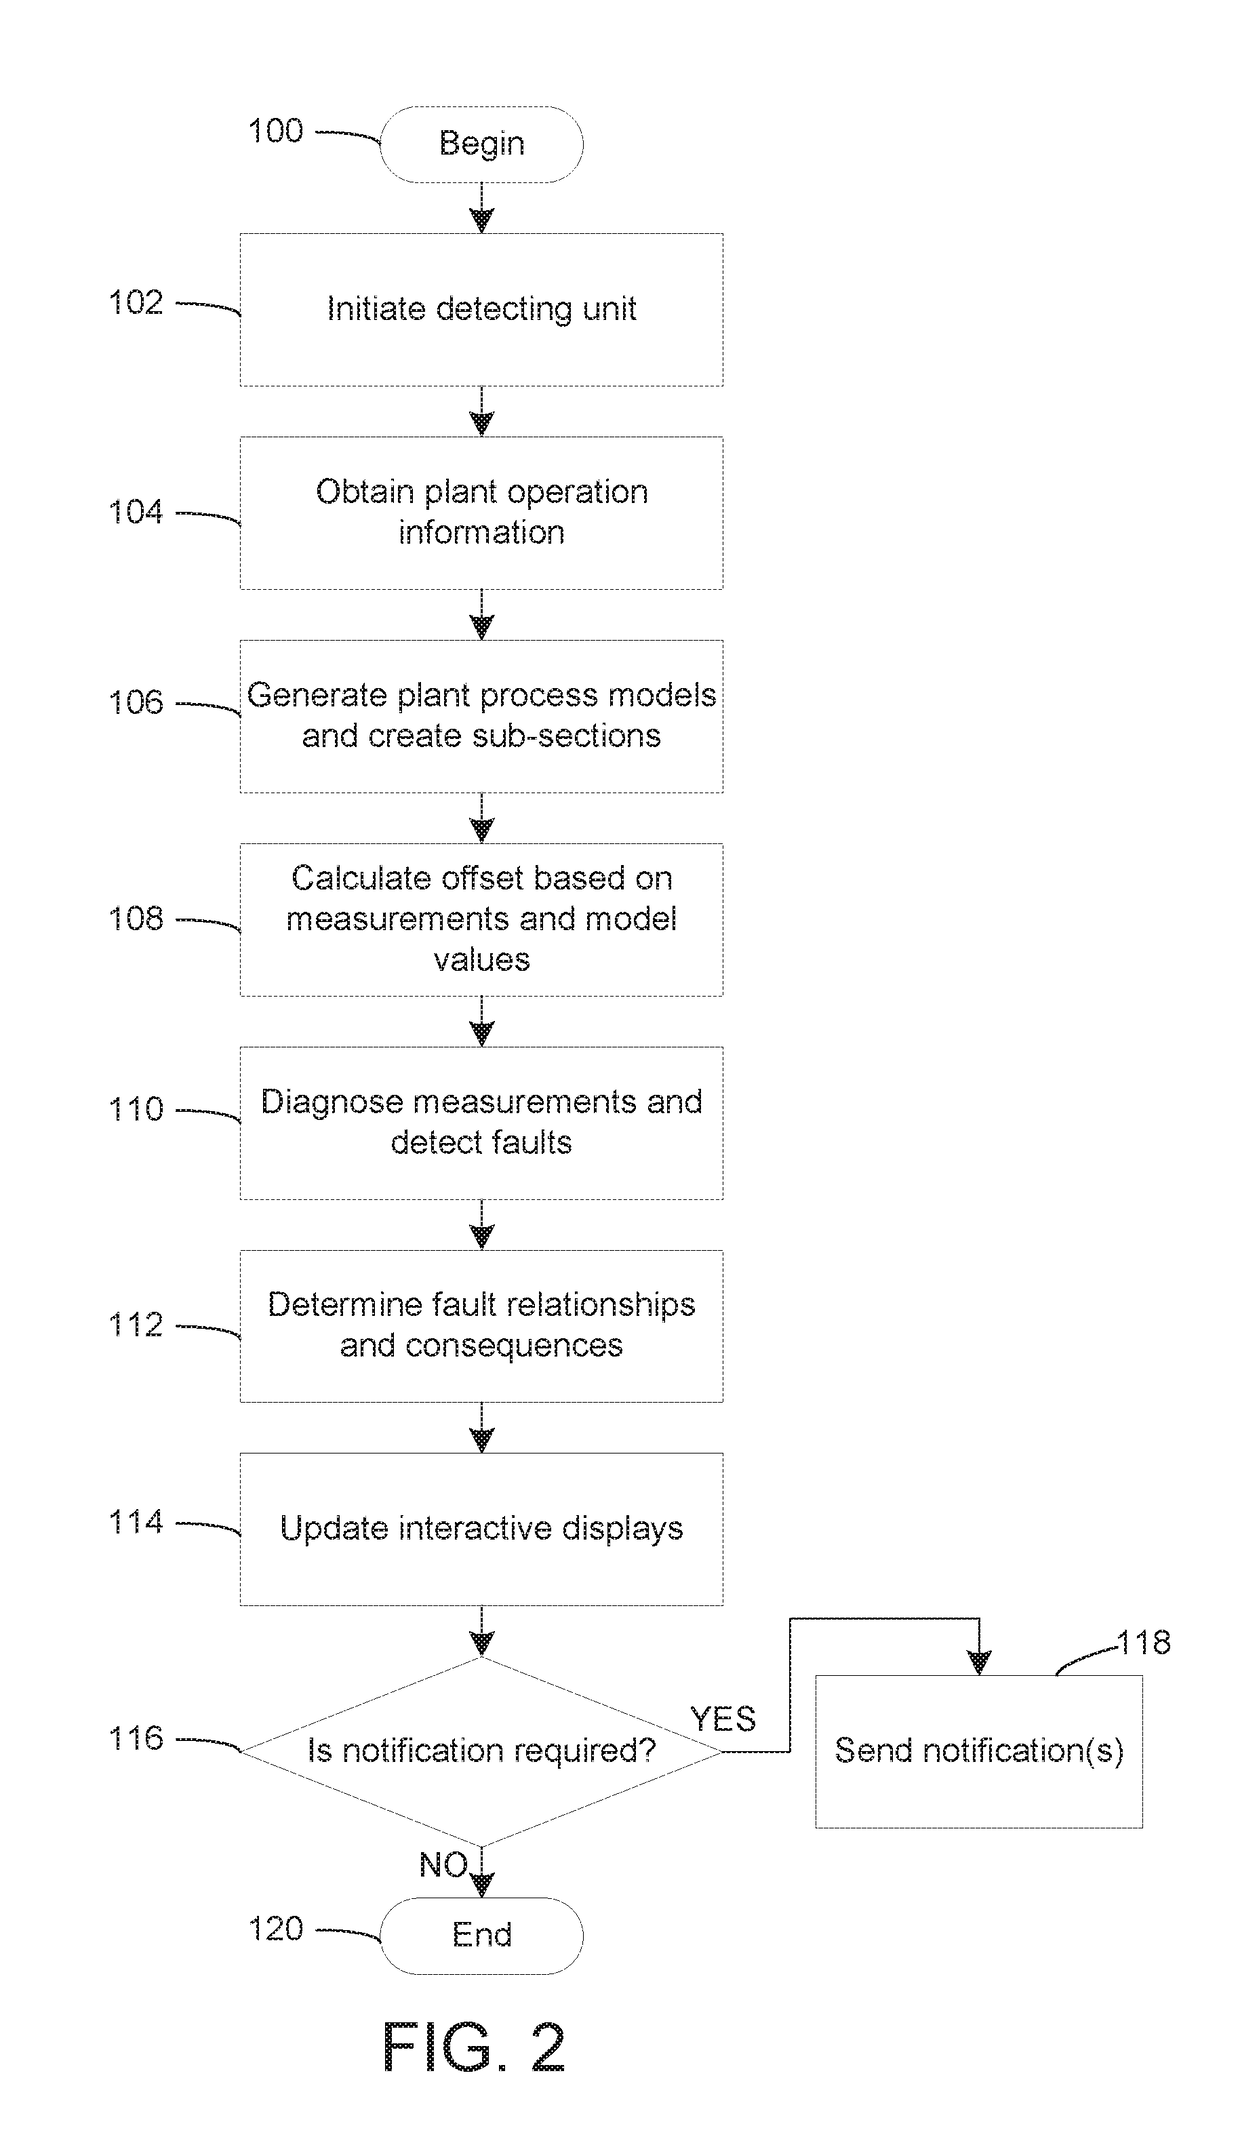 Interactive diagnostic system and method for managing process model analysis